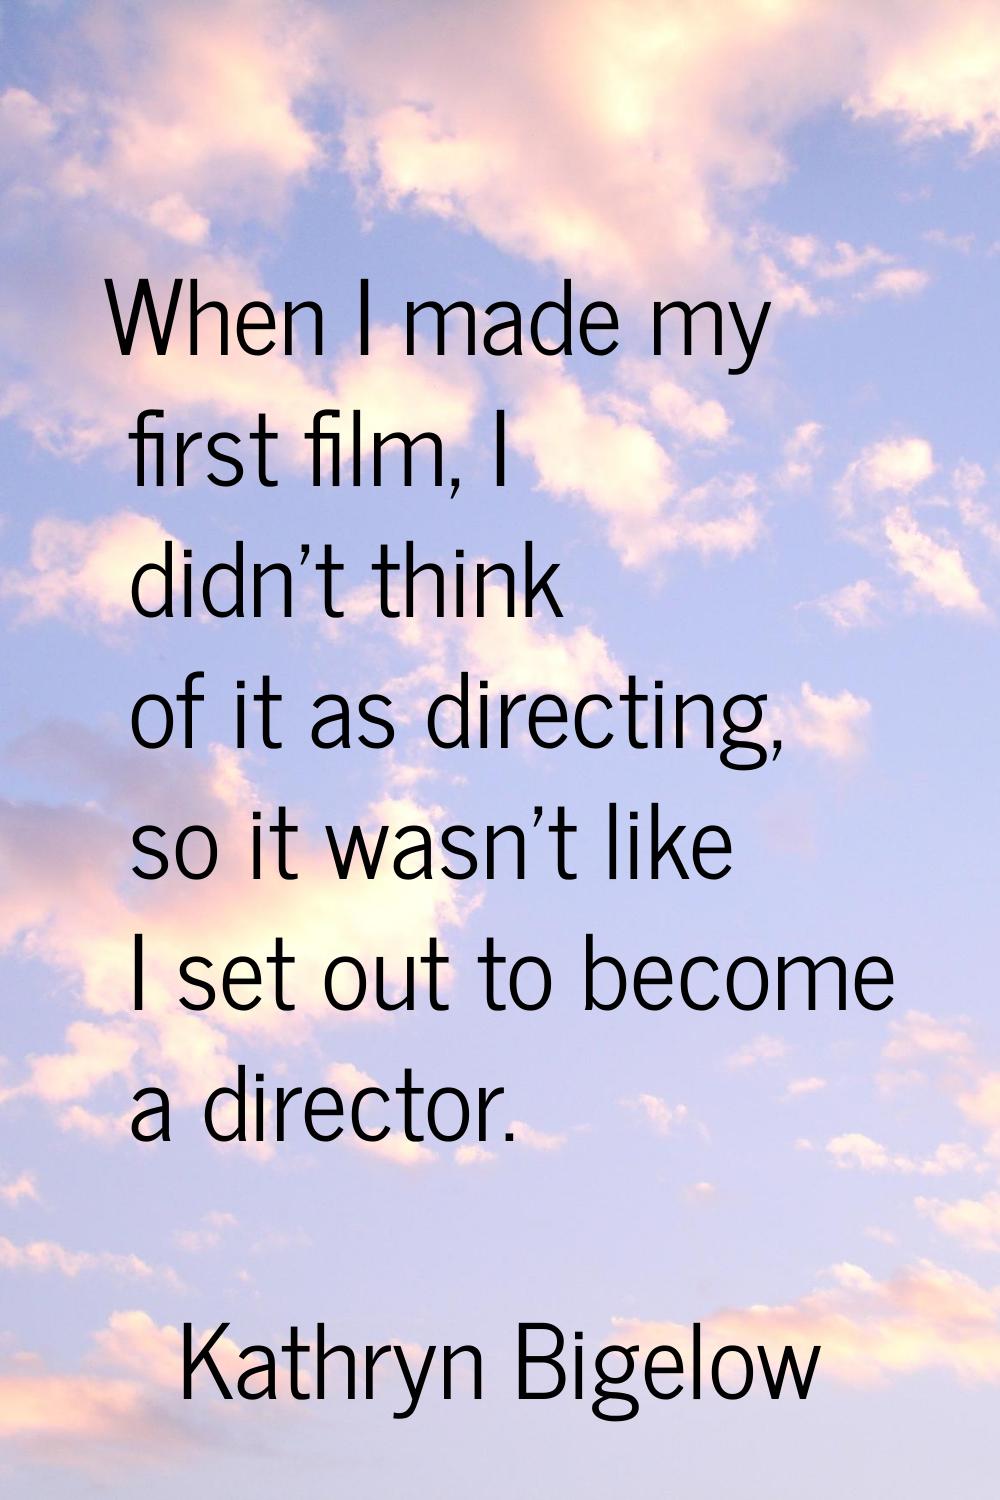 When I made my first film, I didn't think of it as directing, so it wasn't like I set out to become